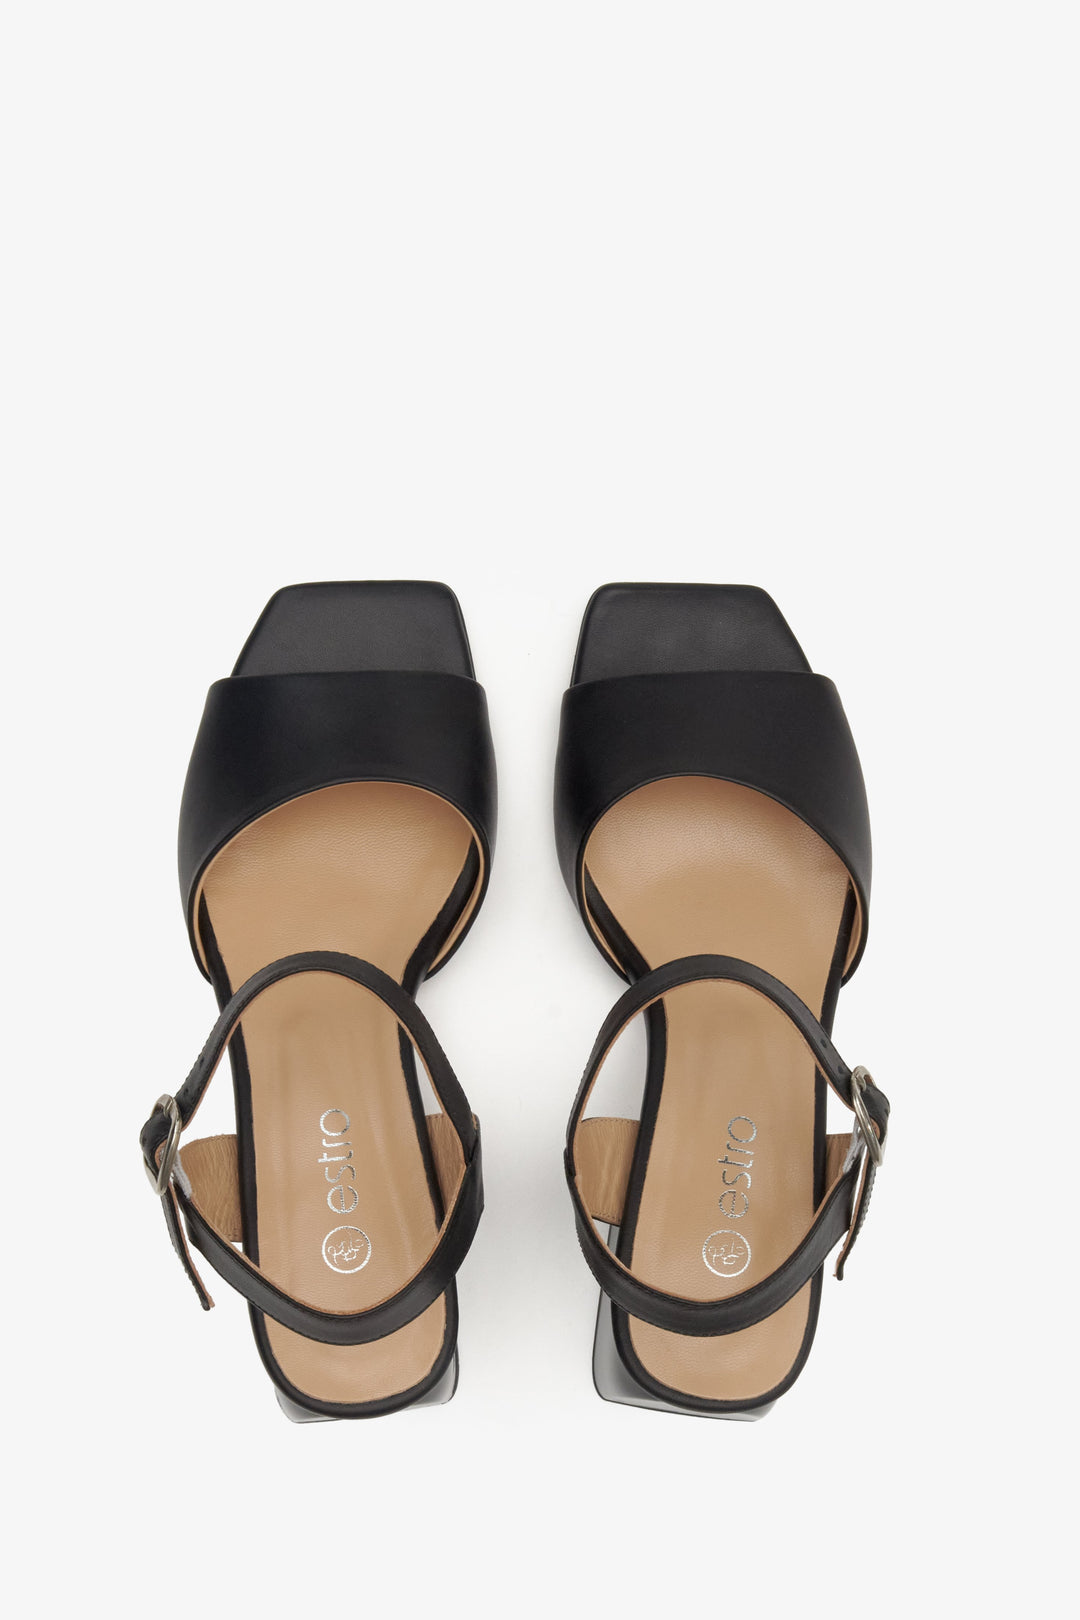 Women's black leather summer heeled sandals by Estro - presentation of the shoe profile.